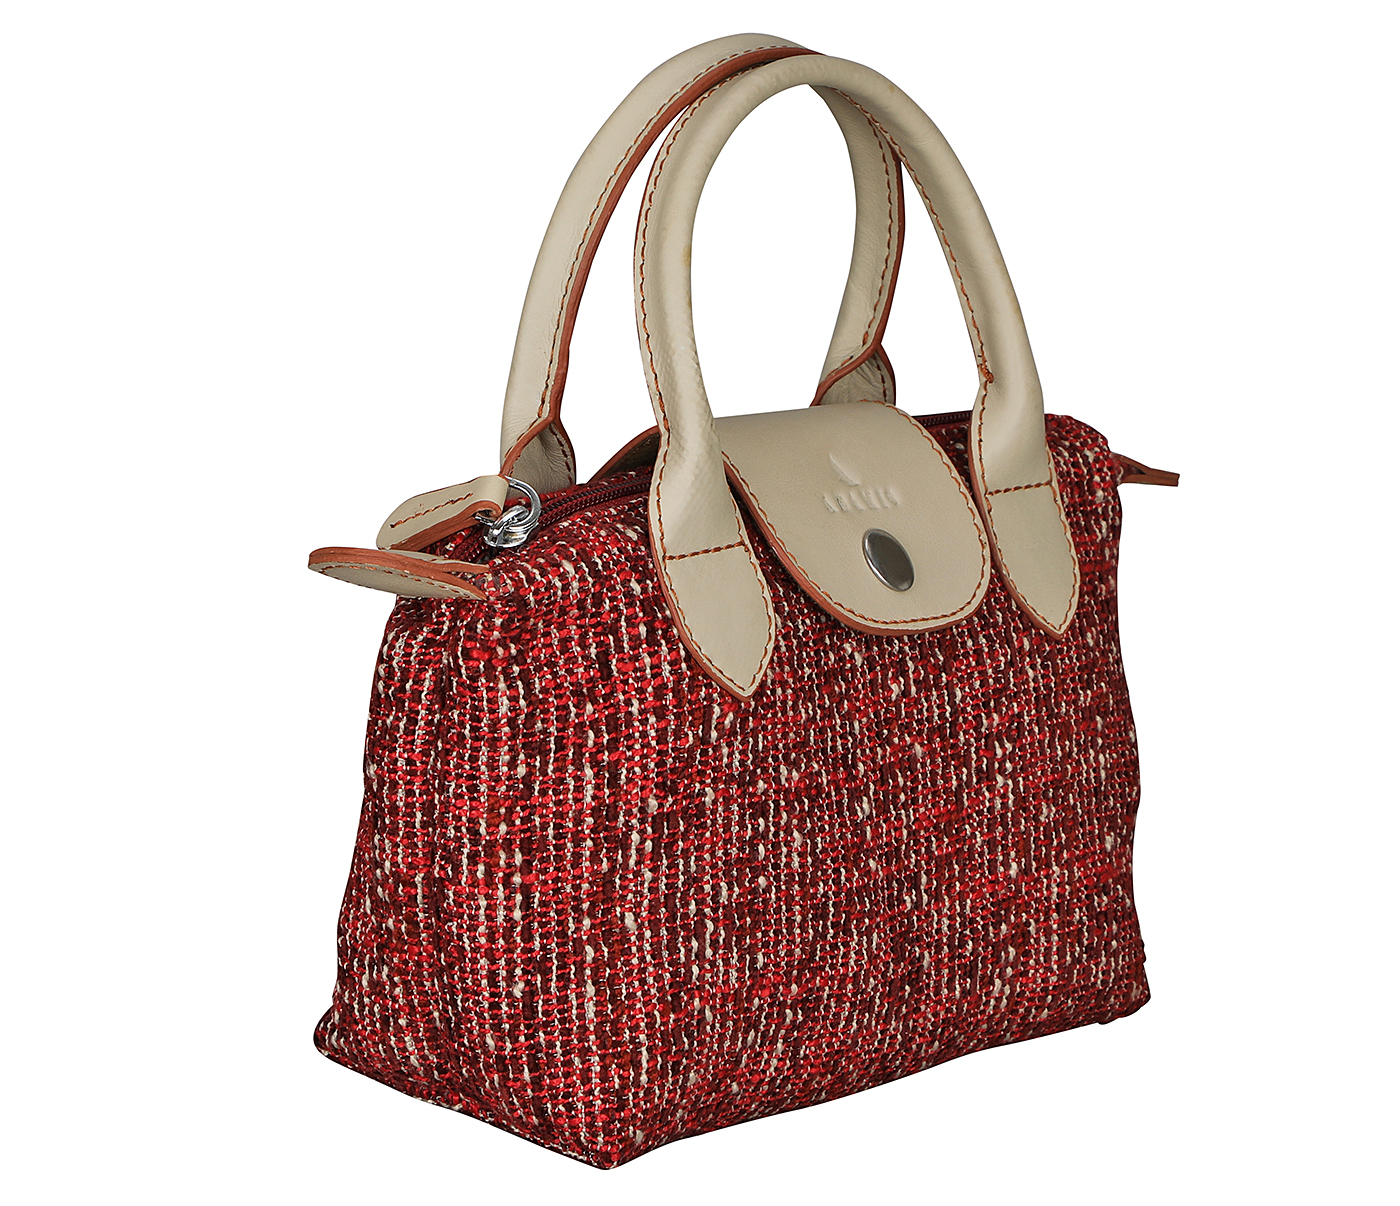 B883--Abene mini tote  in leaf print material with genuine leather handles and flap - Red